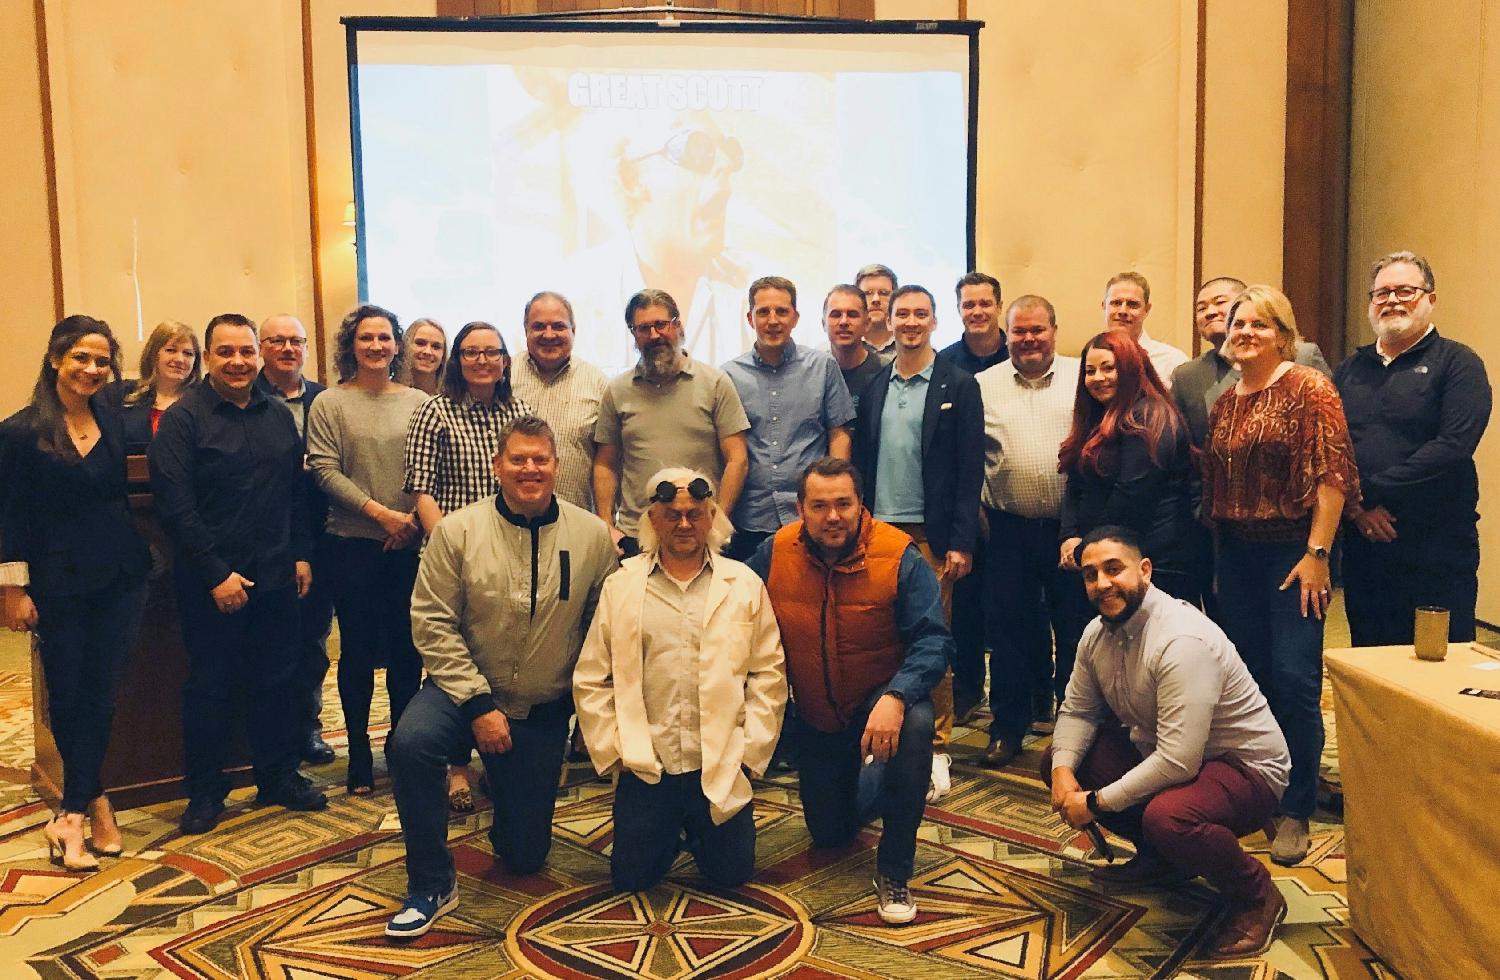 Our amazing sales team learning, collaborating, and having fun at this years Sales Kick Off meeting